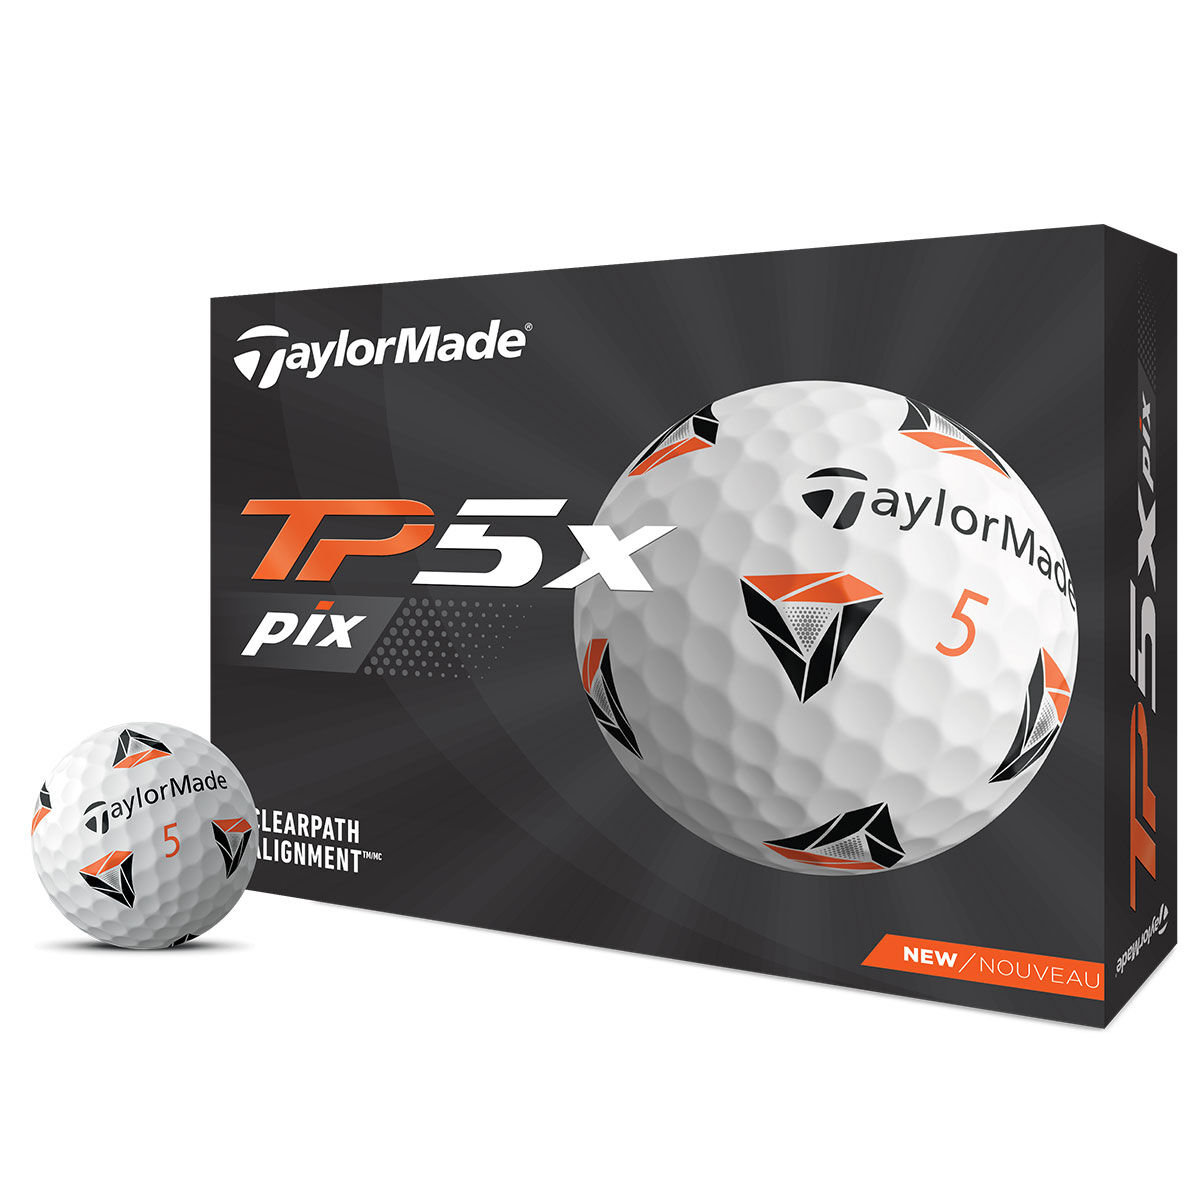 TaylorMade TP5x pix 2.0 12 Golf Ball Pack, Male, White, One Size | American Golf